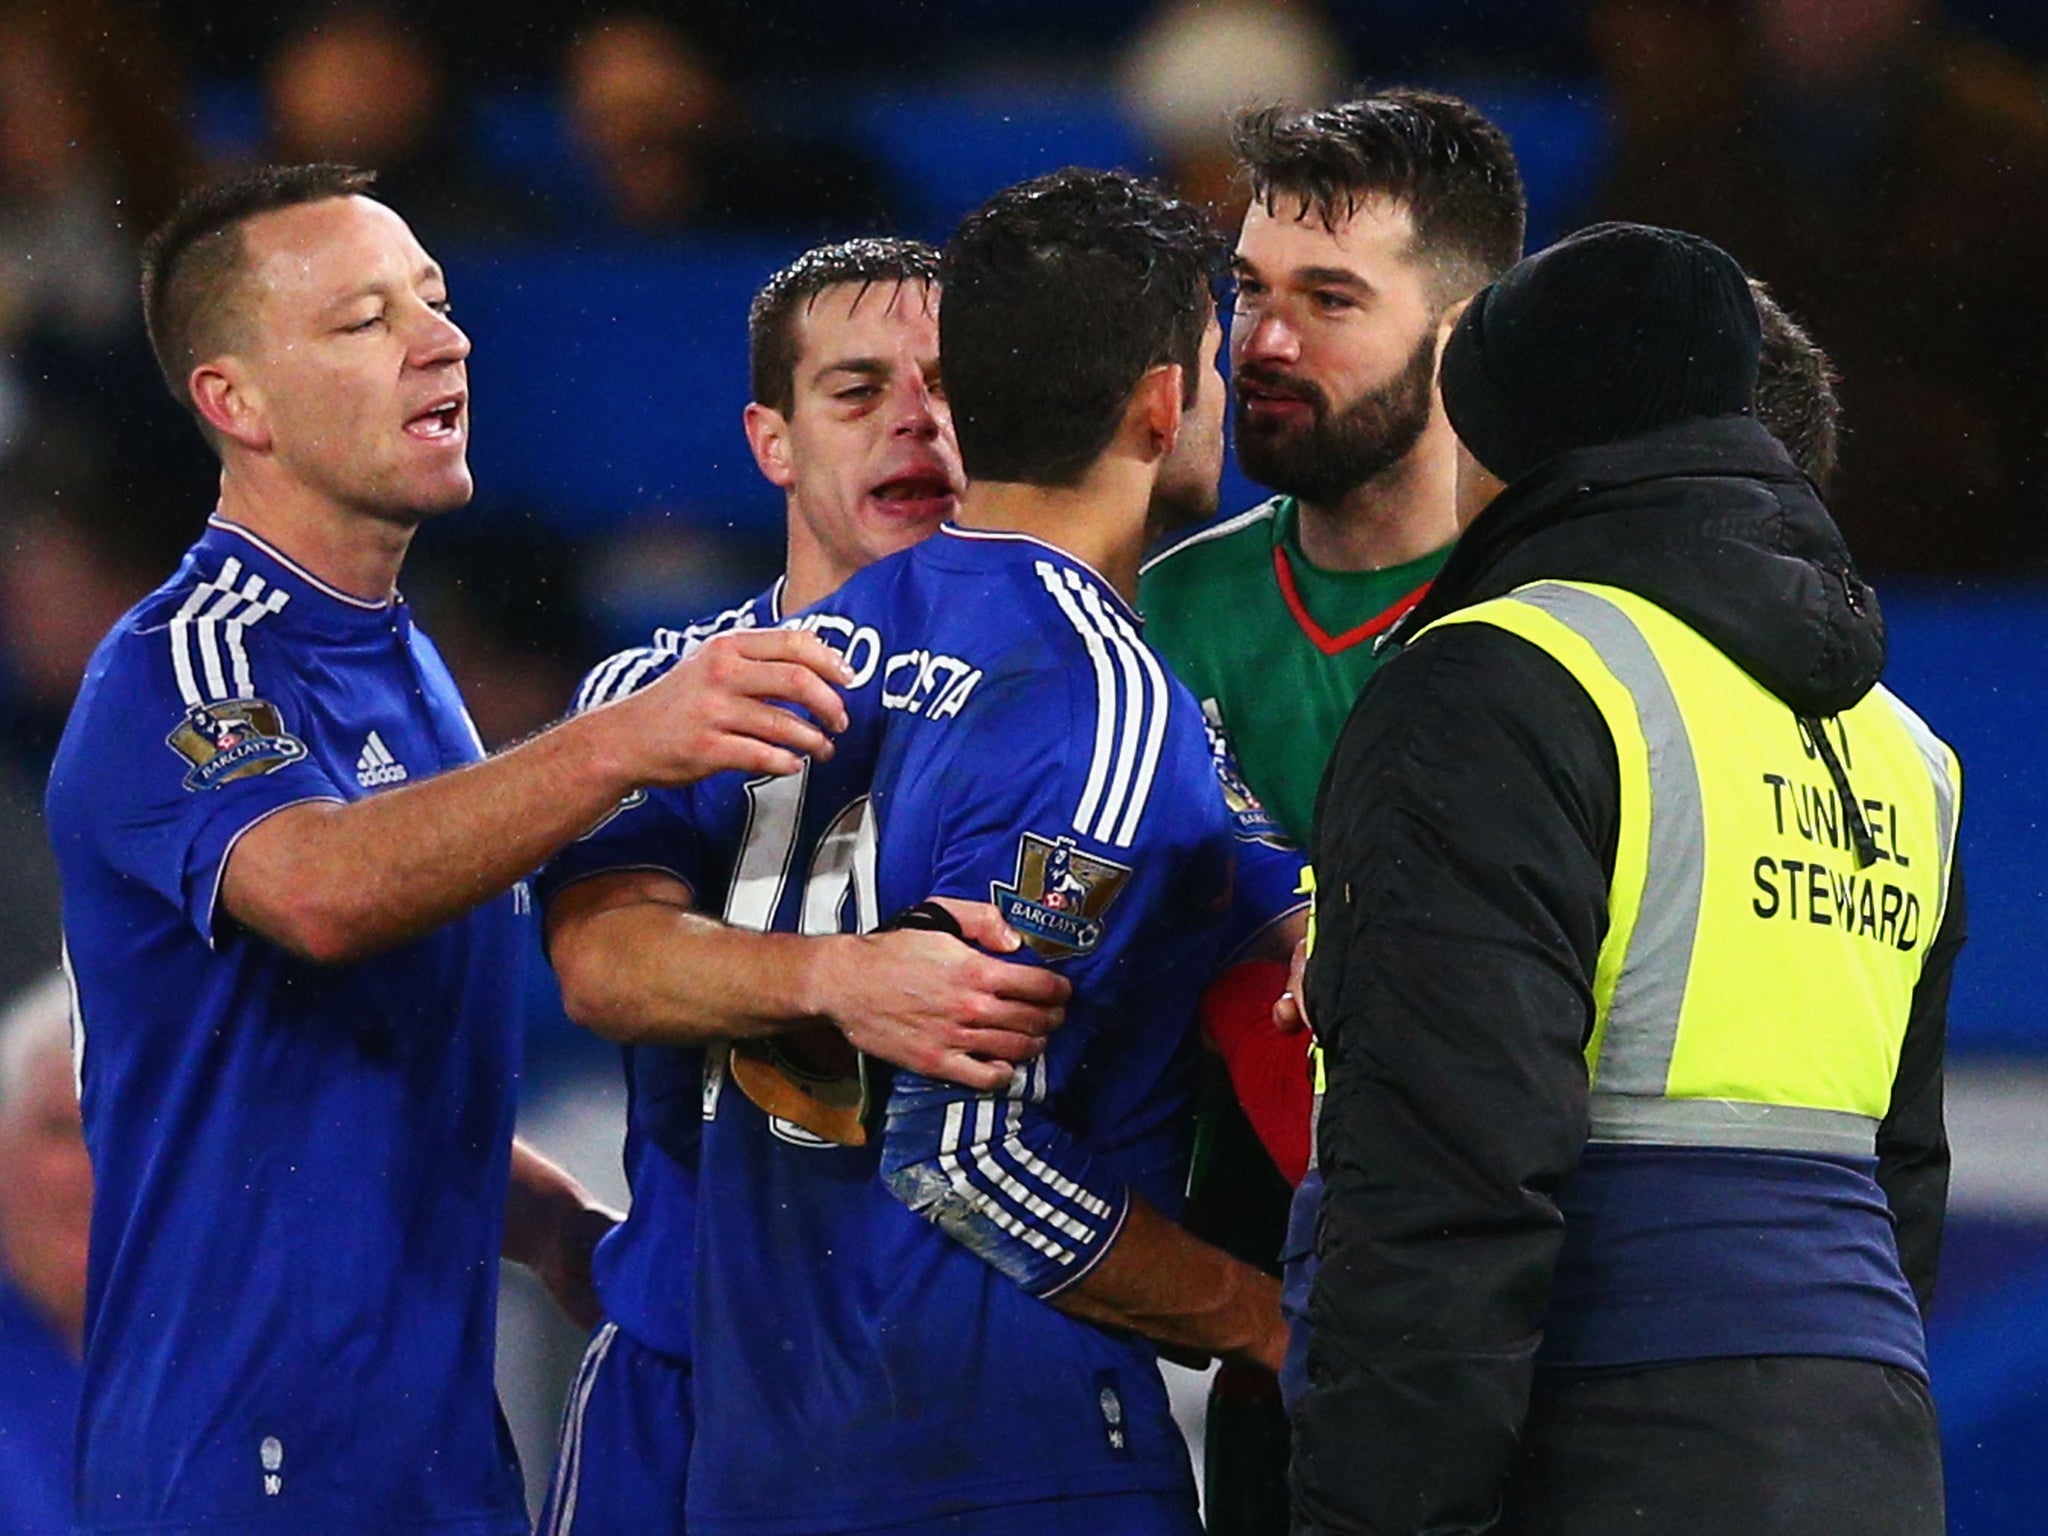 Chelsea striker Diego Costa engages with Boaz Myhill after the final whistle